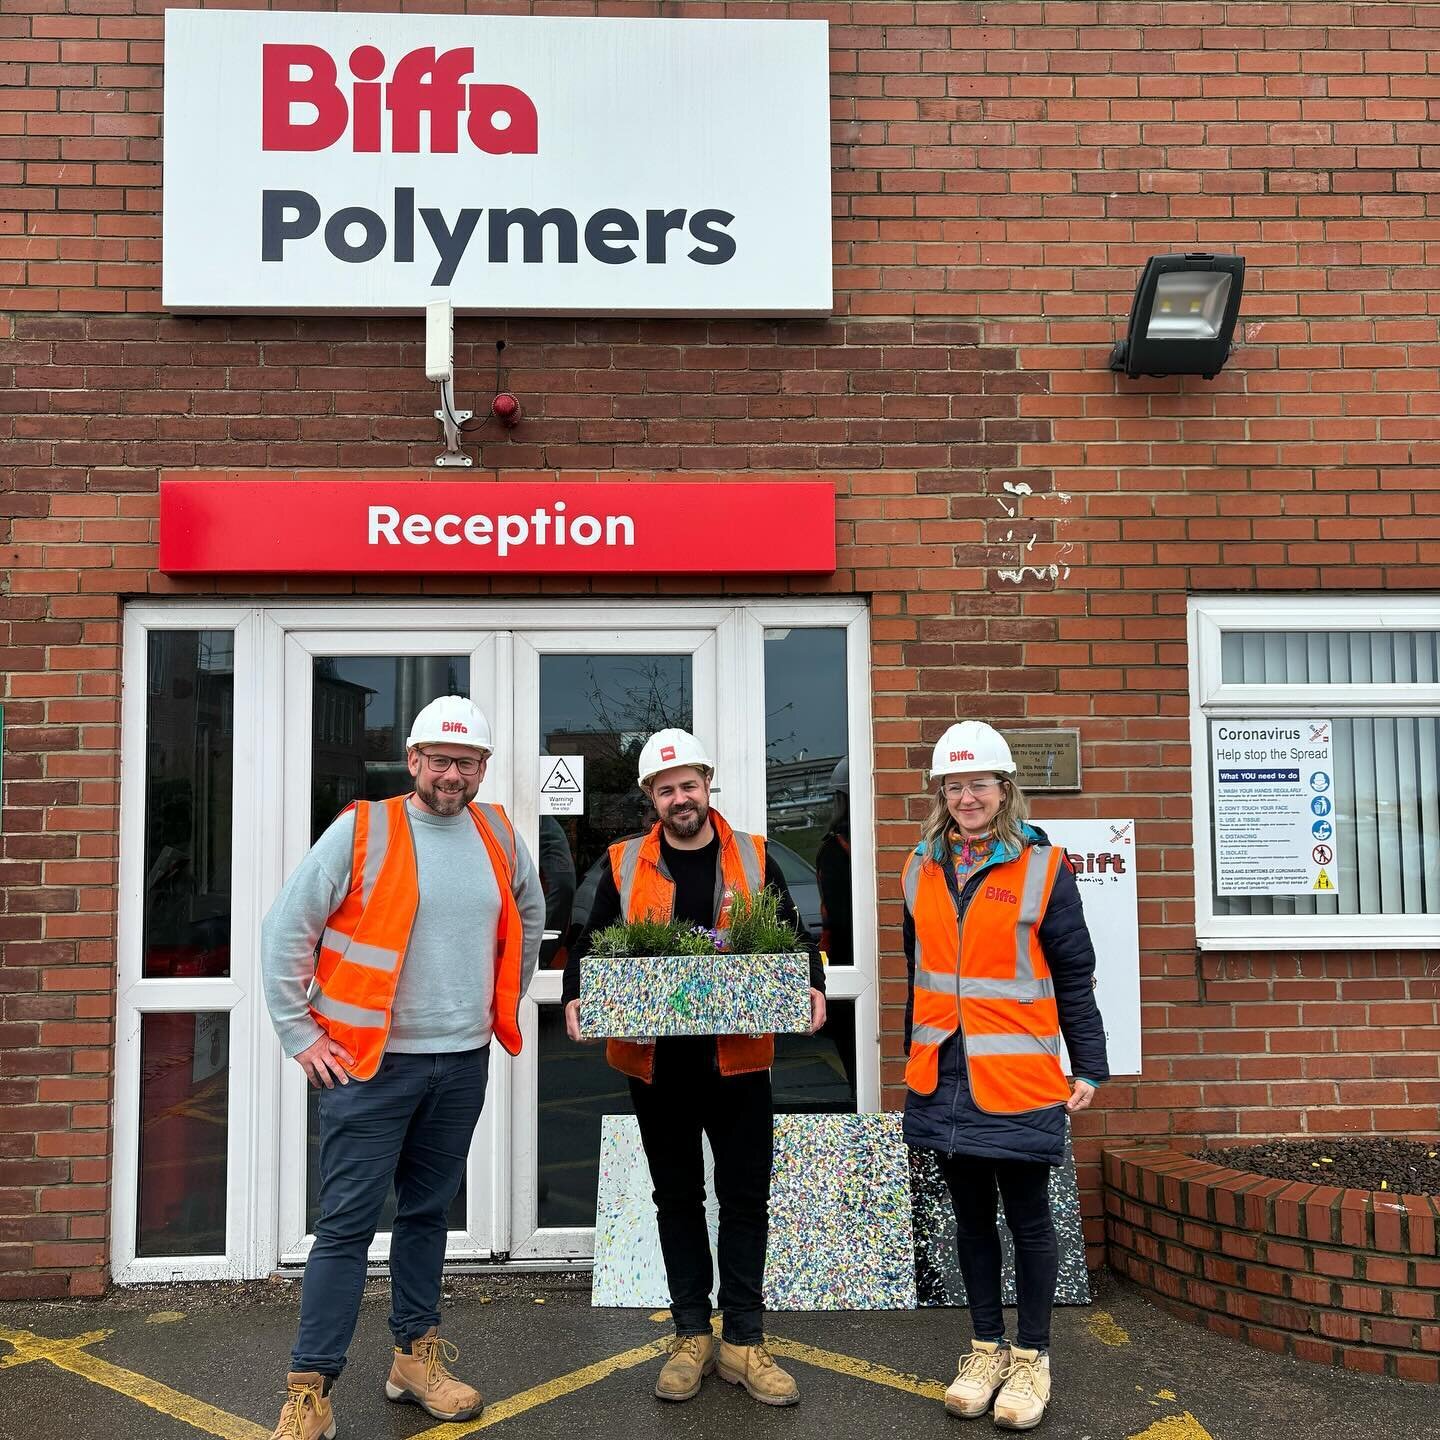 ⭐️ Wow! What an amazing day we&rsquo;ve had at the Biffa Polymers Redcar site! ♻️

👀 We&rsquo;ve seen the journey of our latest recycled plastic sheet material firsthand, from household plastic packaging to high quality recycled plastic, raw materia